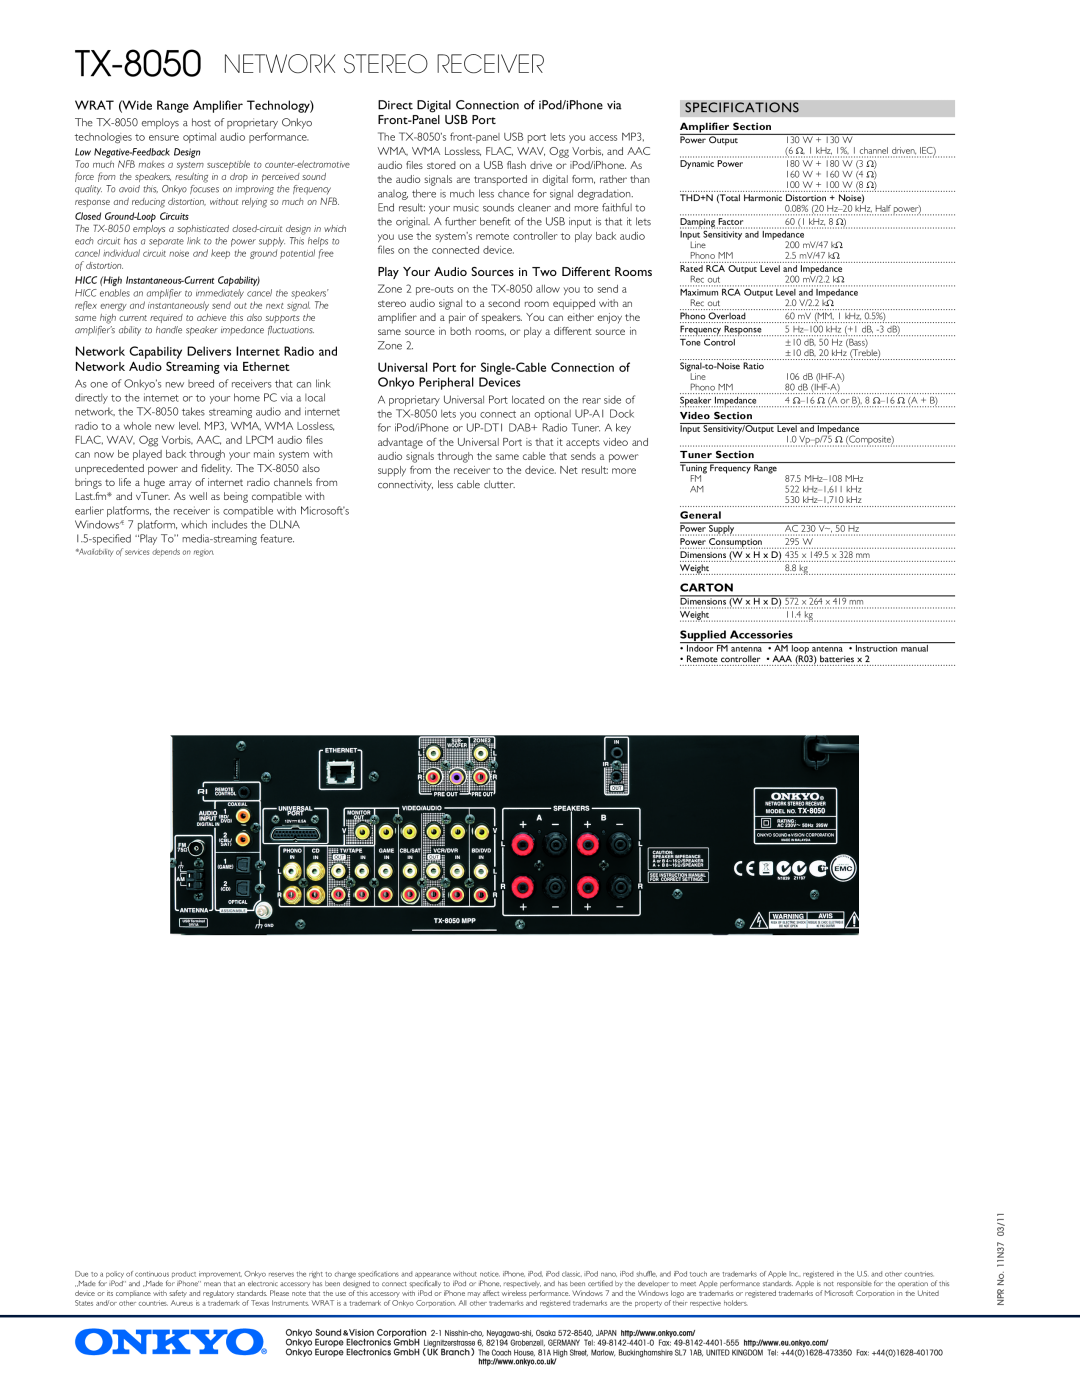 Onkyo manual TX-8050 NETWORK STEREO RECEIVER, Specifications 